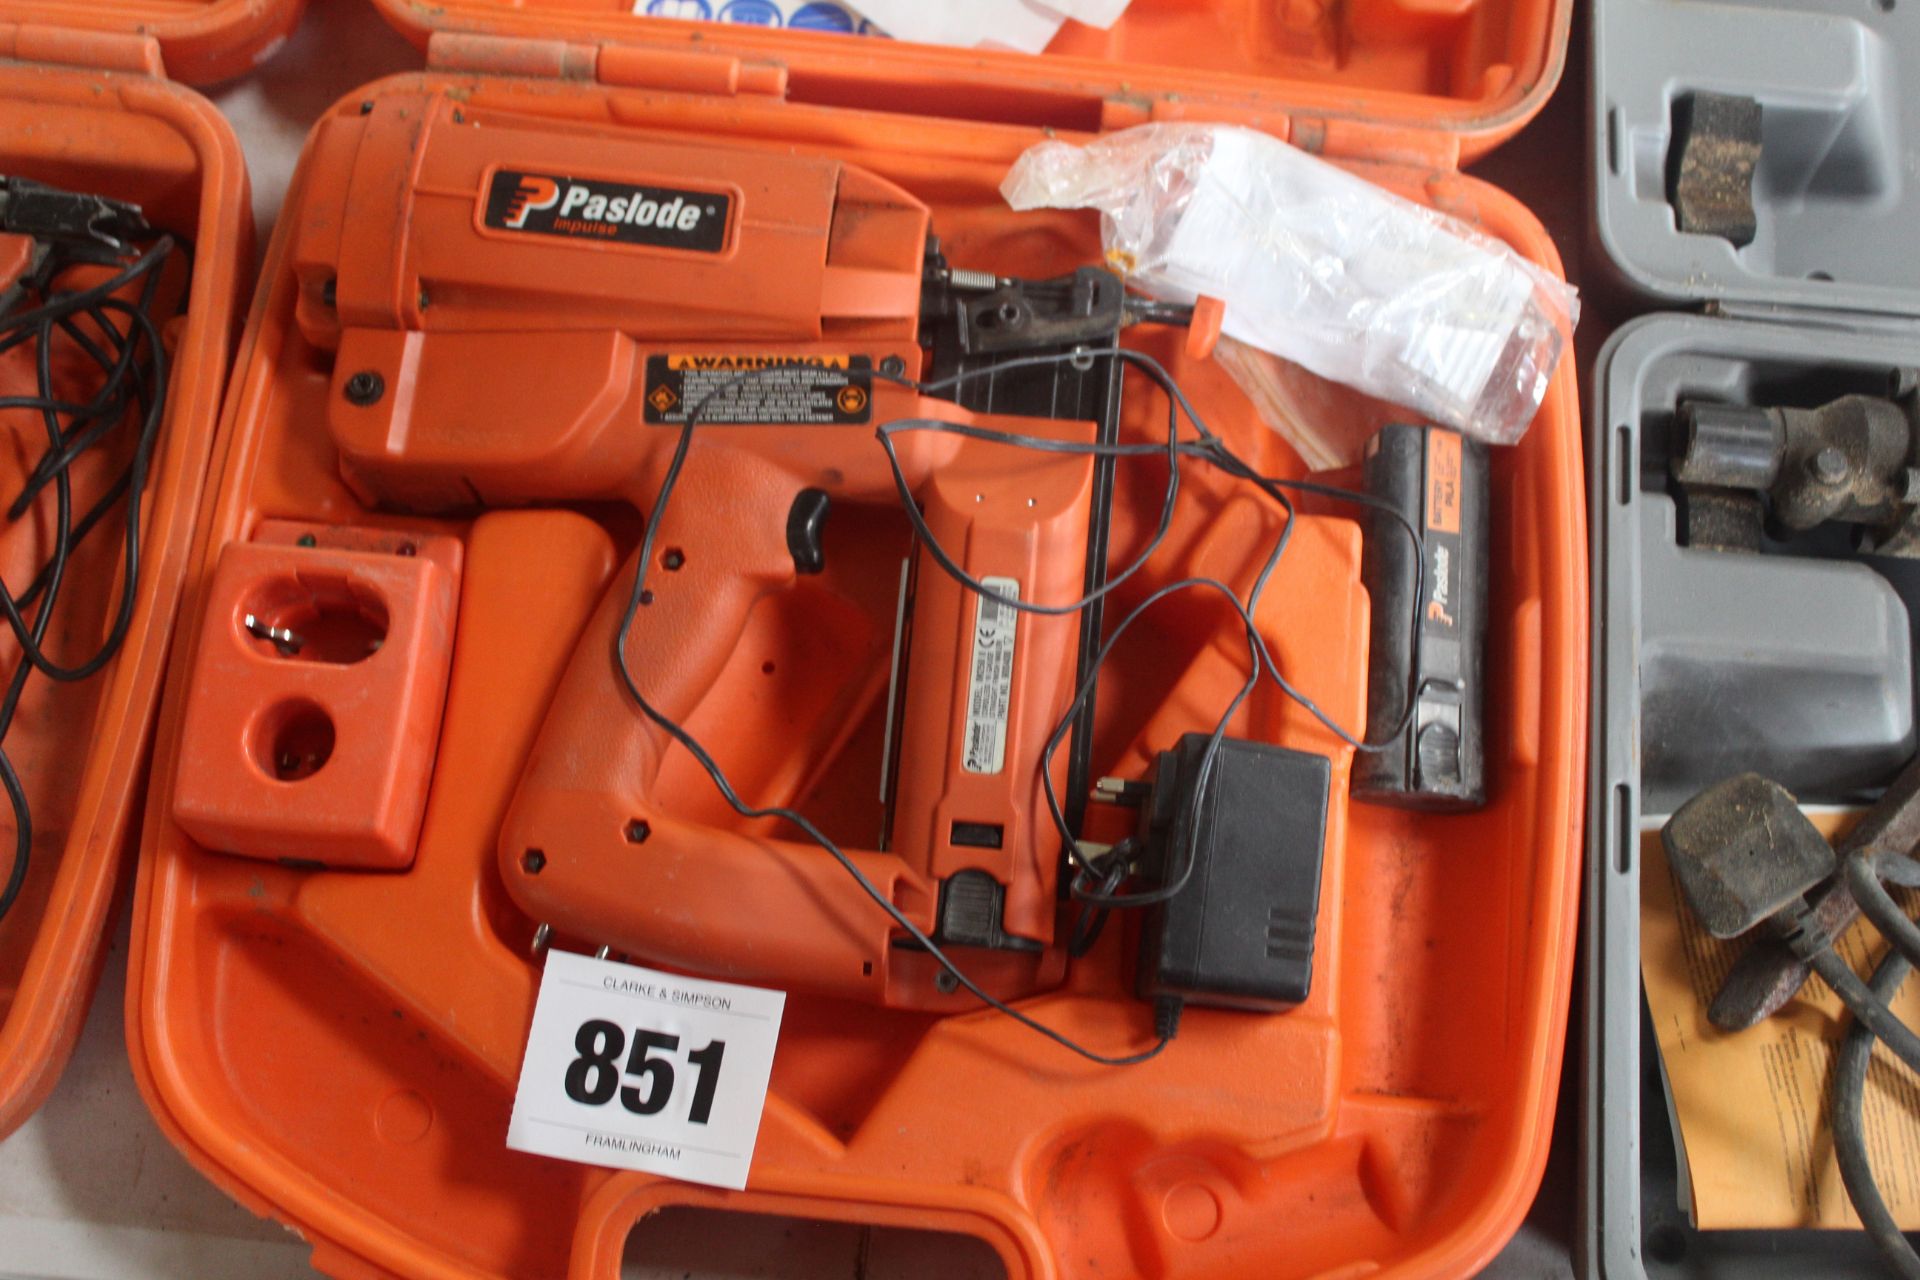 Paslode nail gun. With battery and charger.